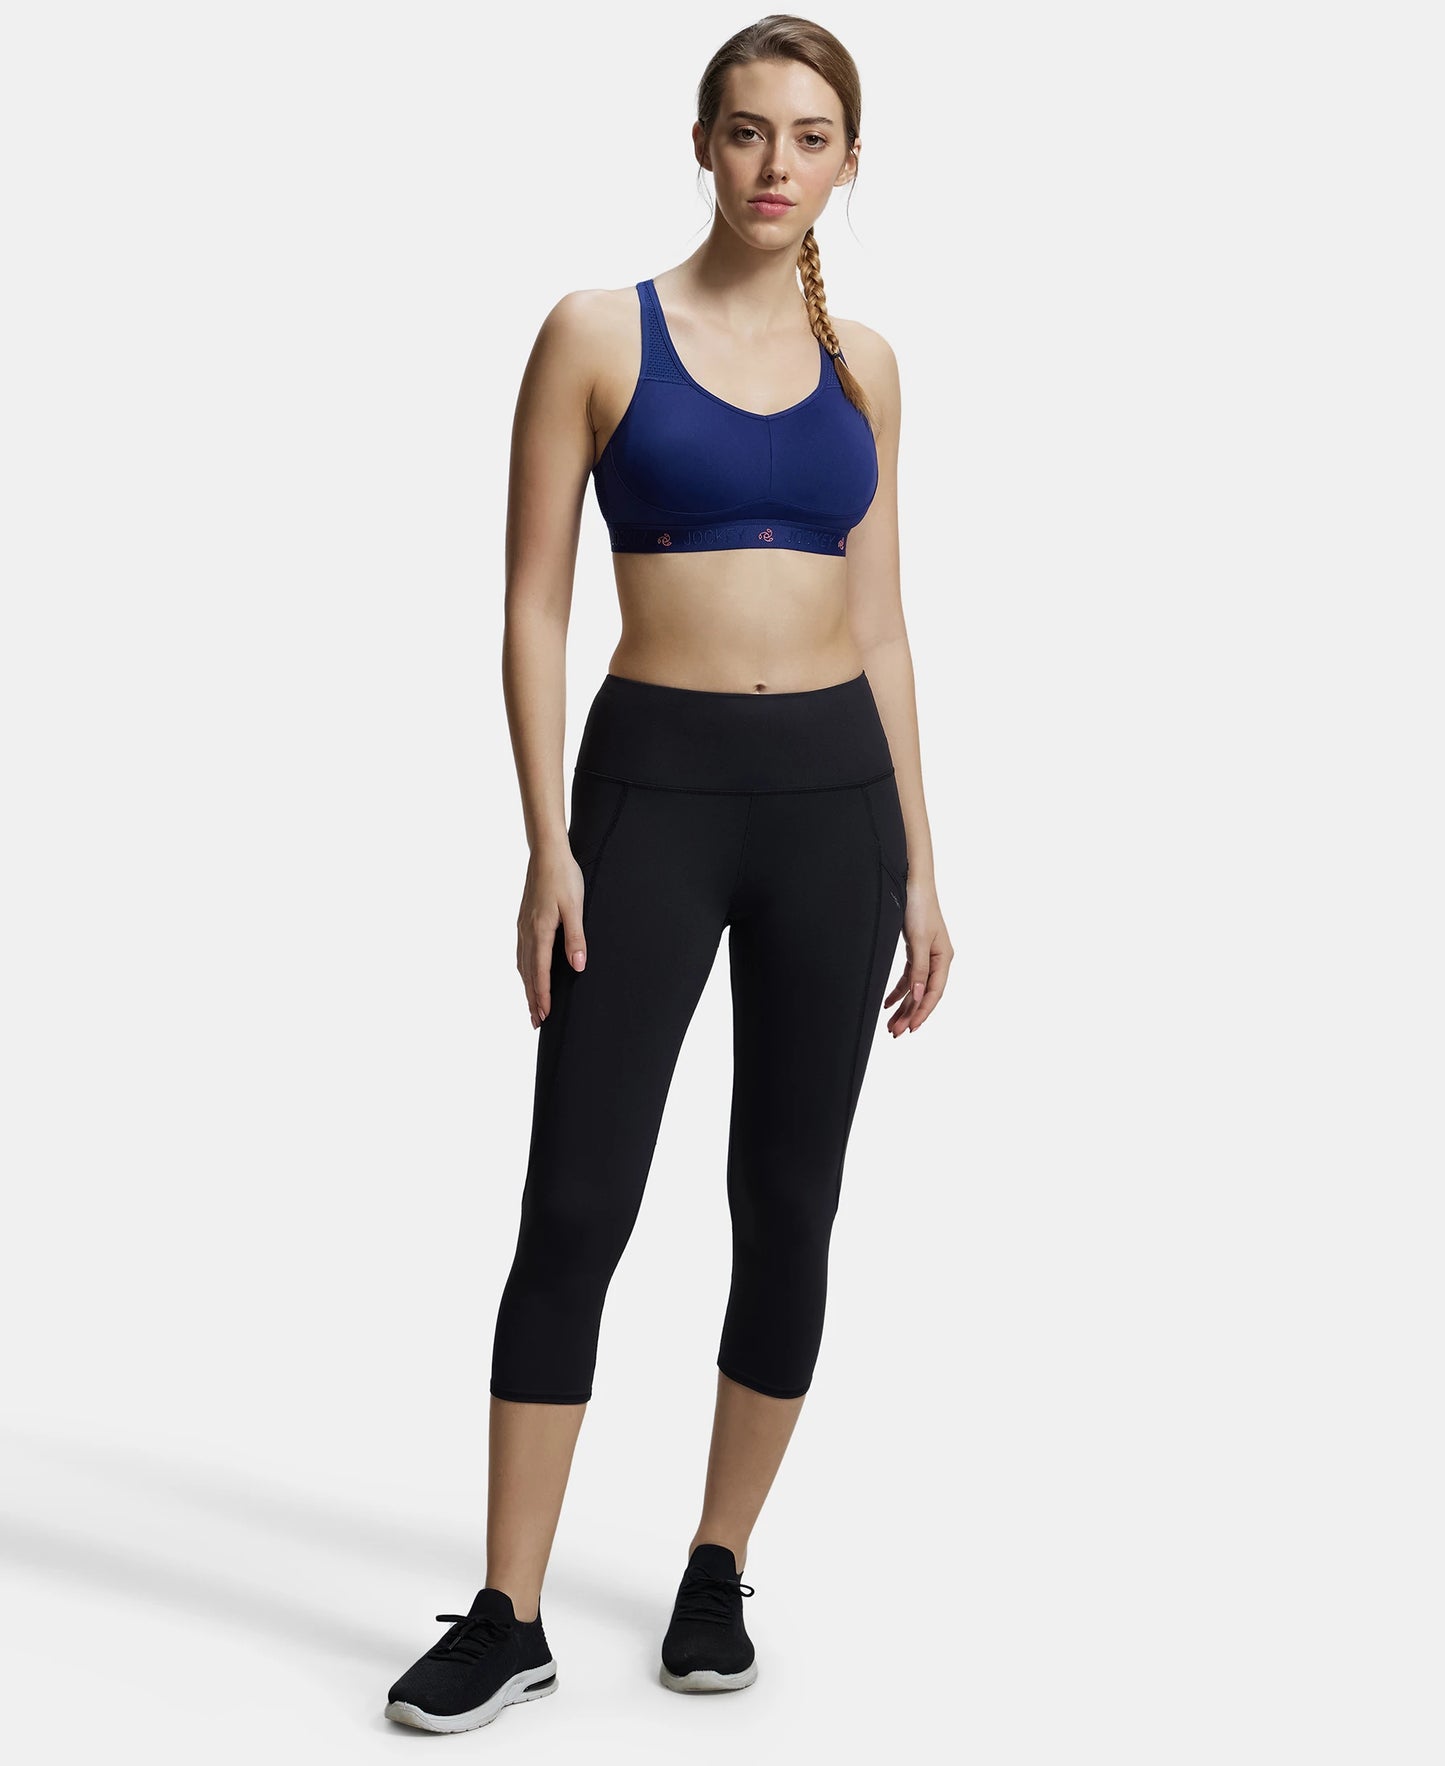 Wirefree Padded Tactel Nylon Elastane Stretch Full Coverage Sports Bra with Optional Cross Back Styling - Midnight Sail